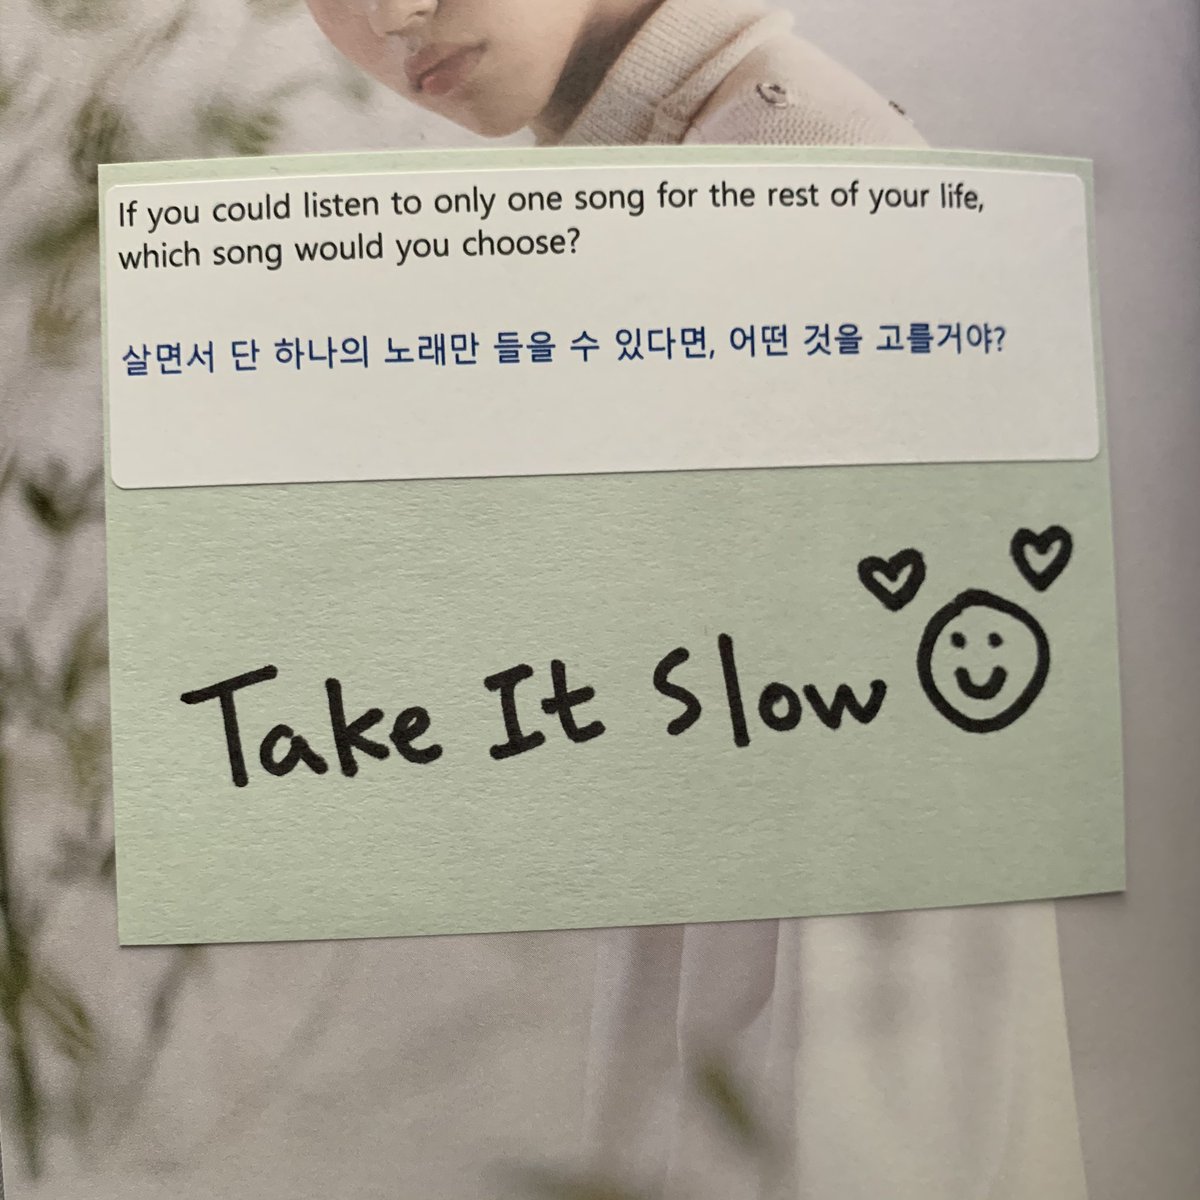 WOONGGI ♡Q. if you could listen to only one song for the rest of your life, which song would you choose?A. take it slow